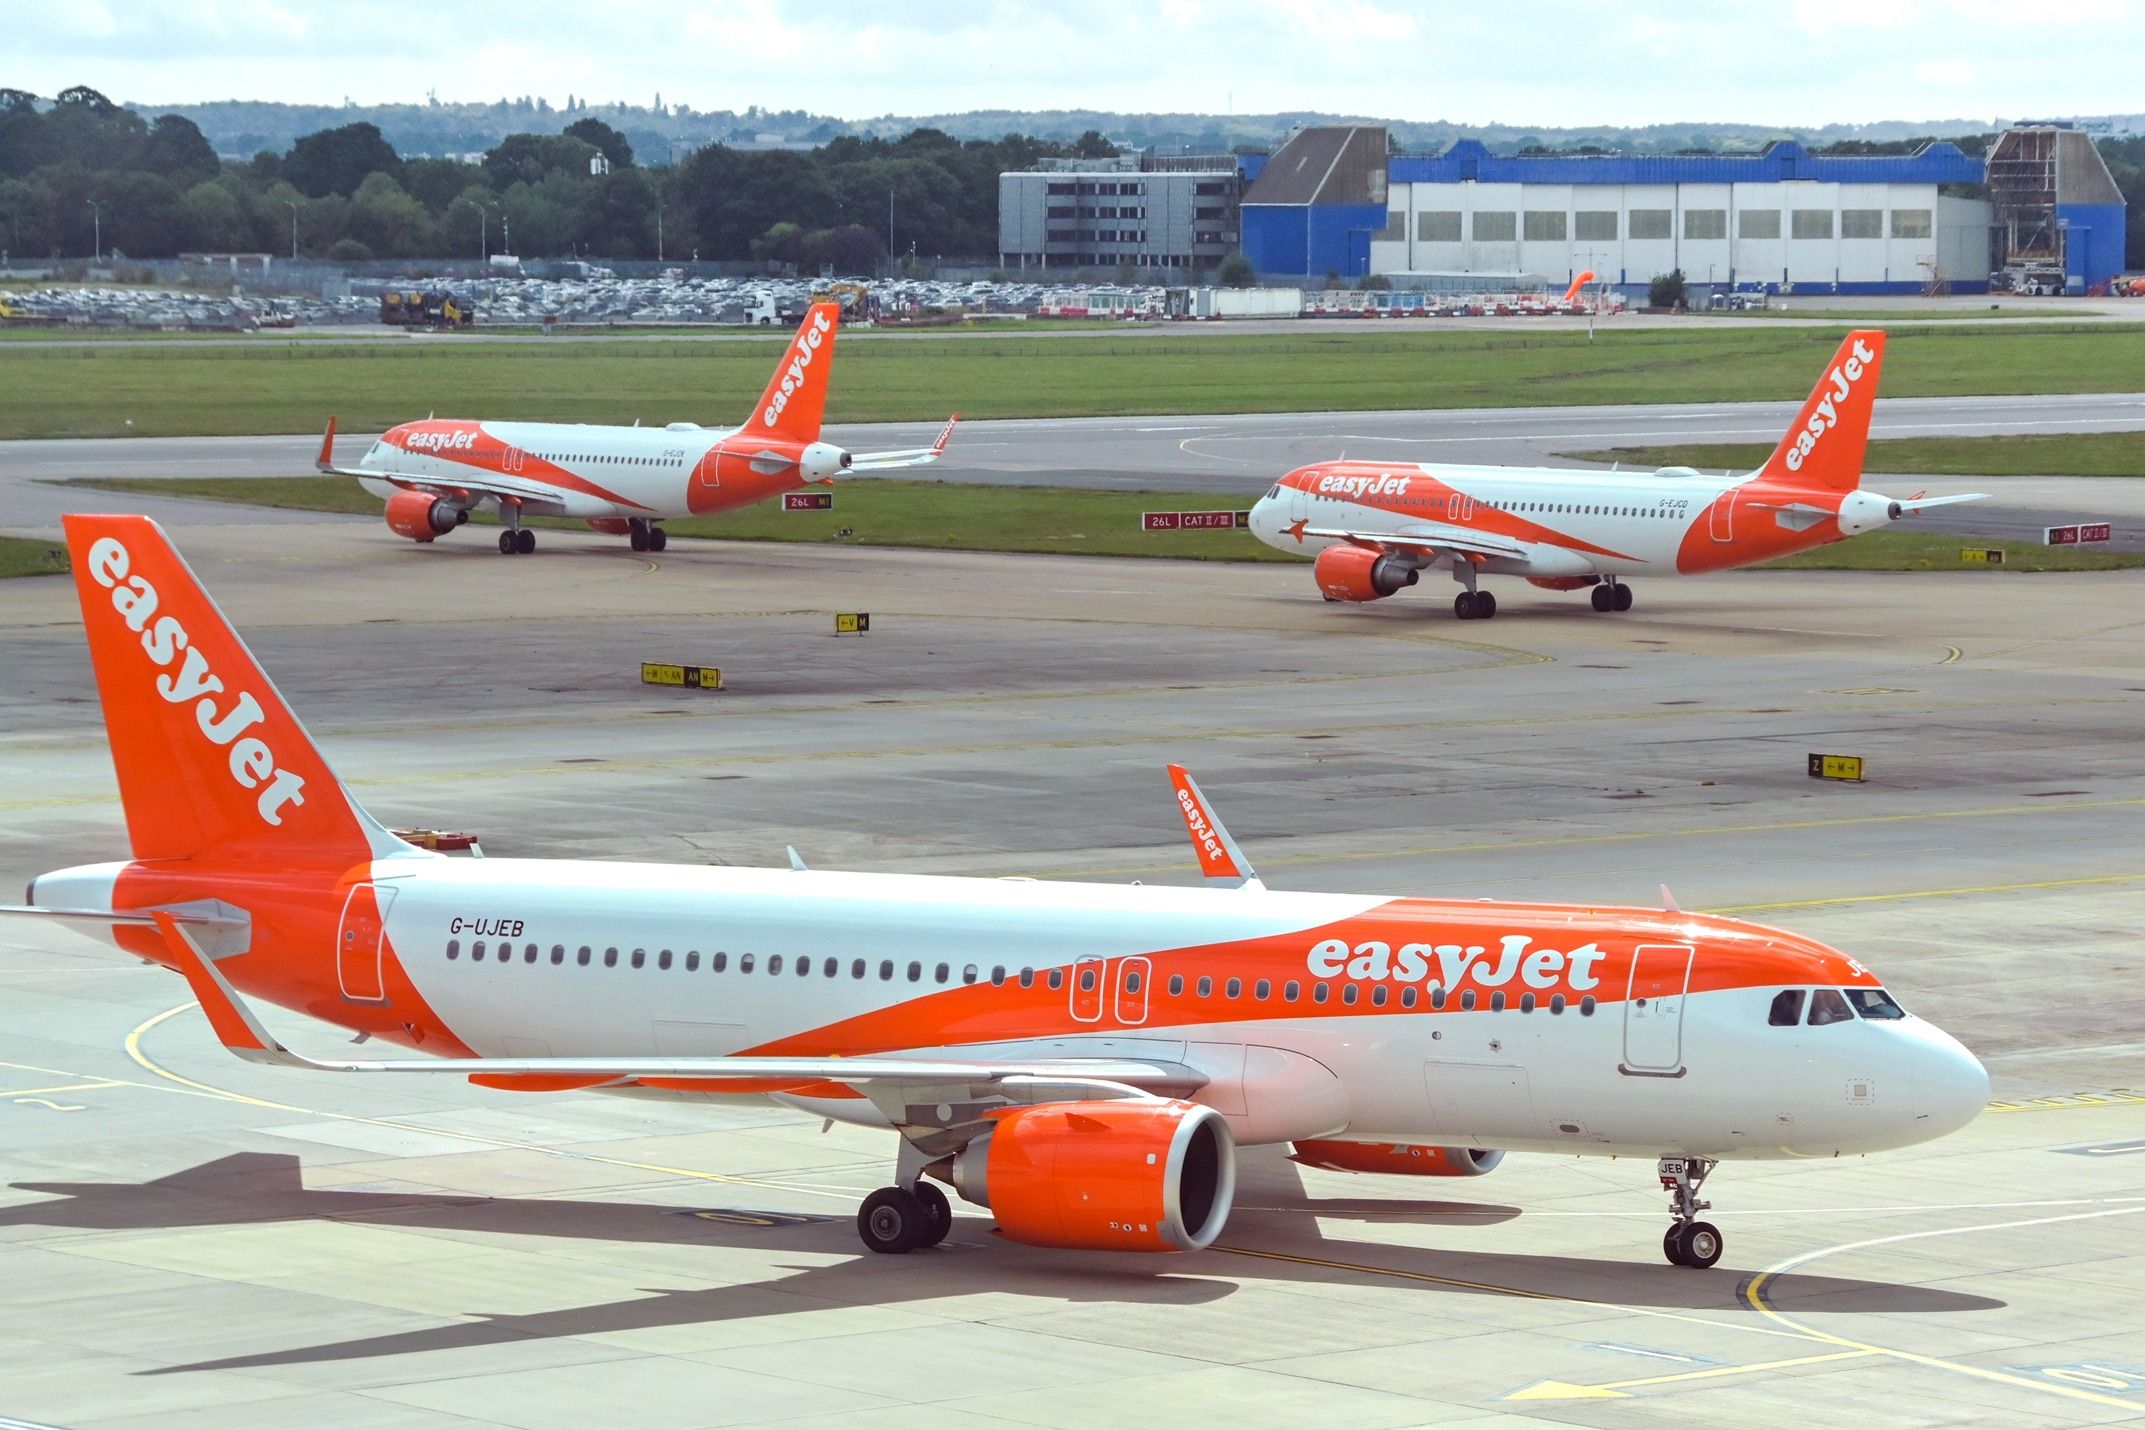 easyJet Airbus aircraft at LGW shutterstock_2350273873